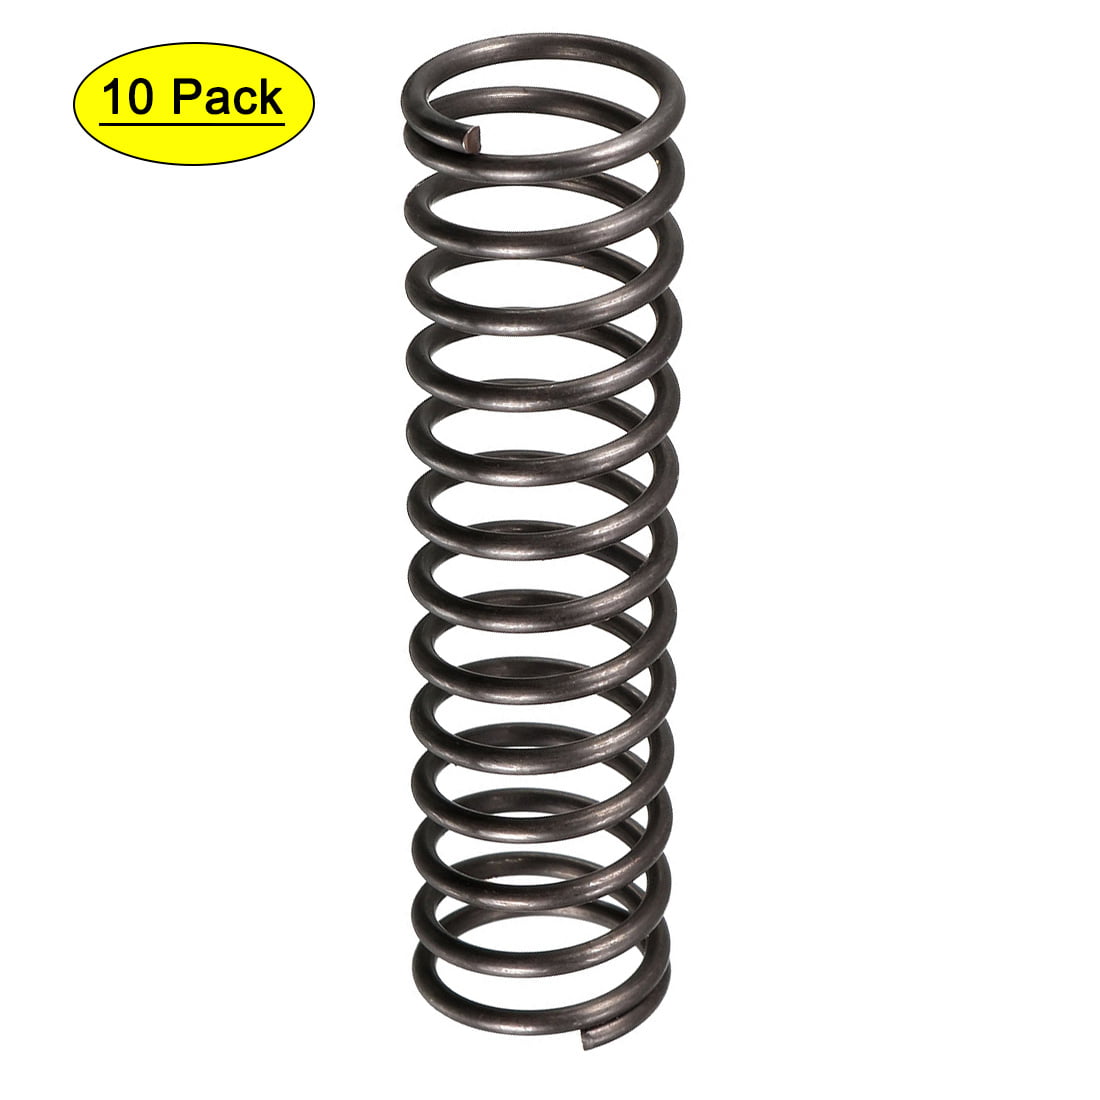 10pcs Stainless Steel Spring Compression Pressure Small Spring Diameter 5-12mm 